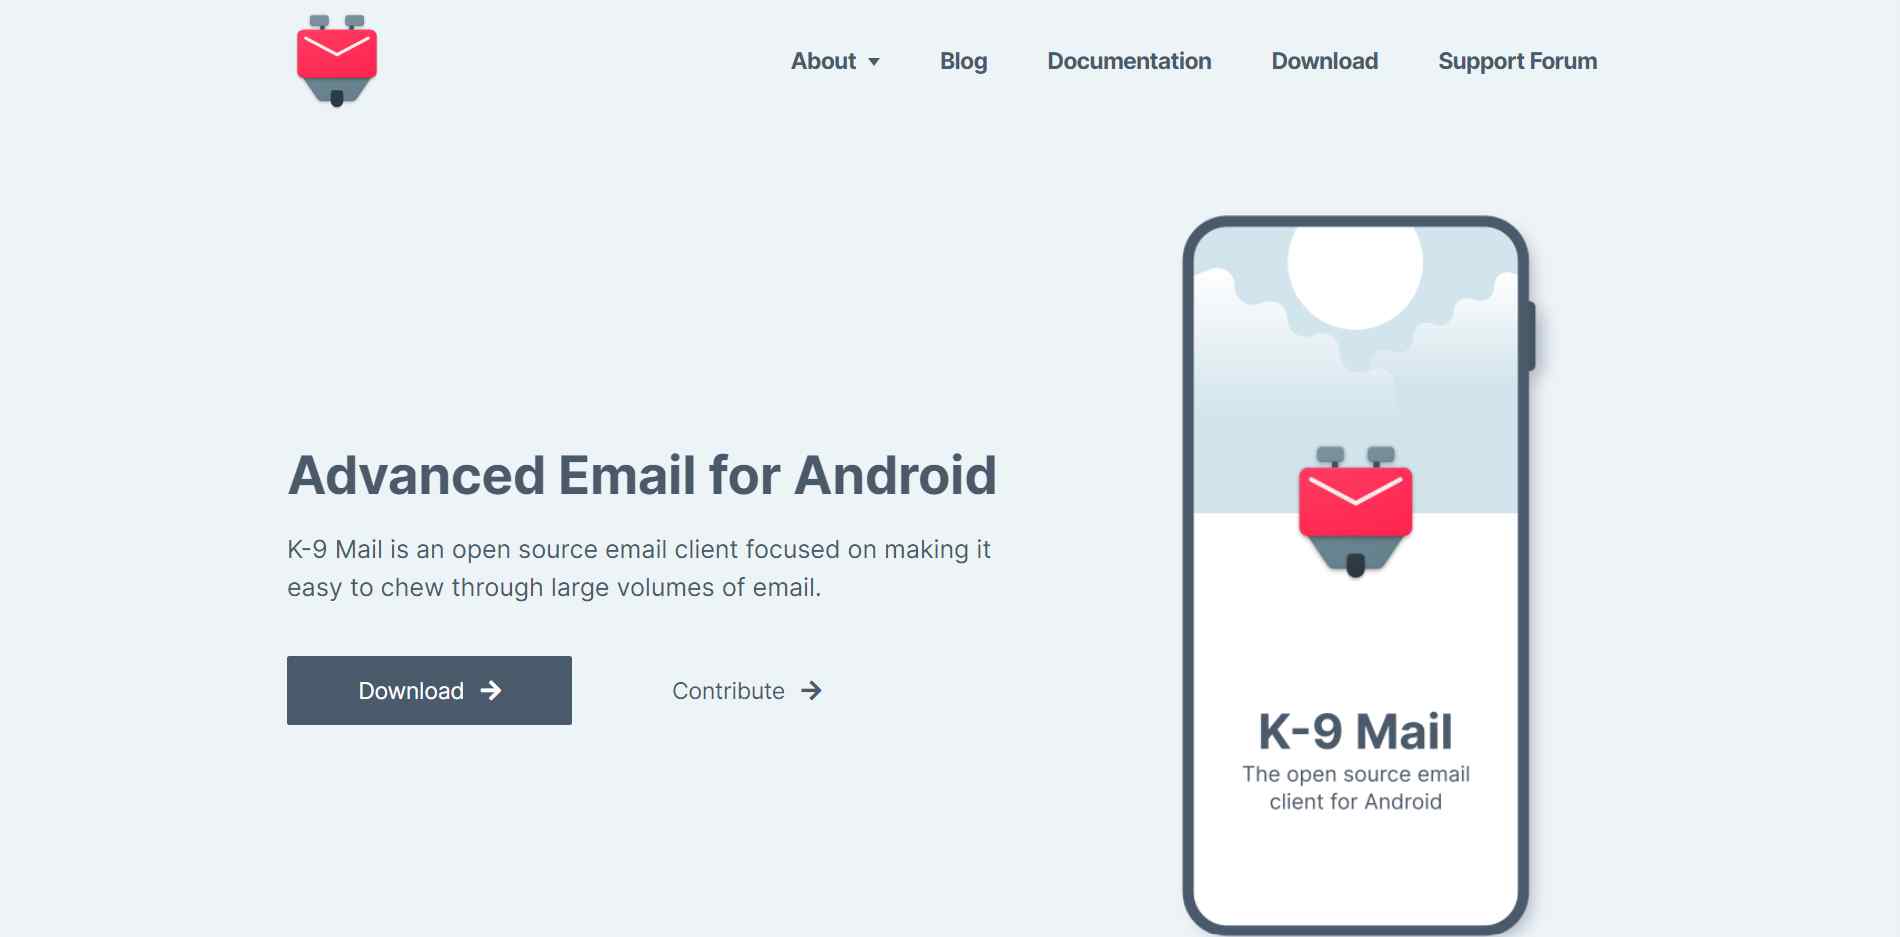 K-9 Mail is an email program for Android devices that helps people stay organized and in touch.